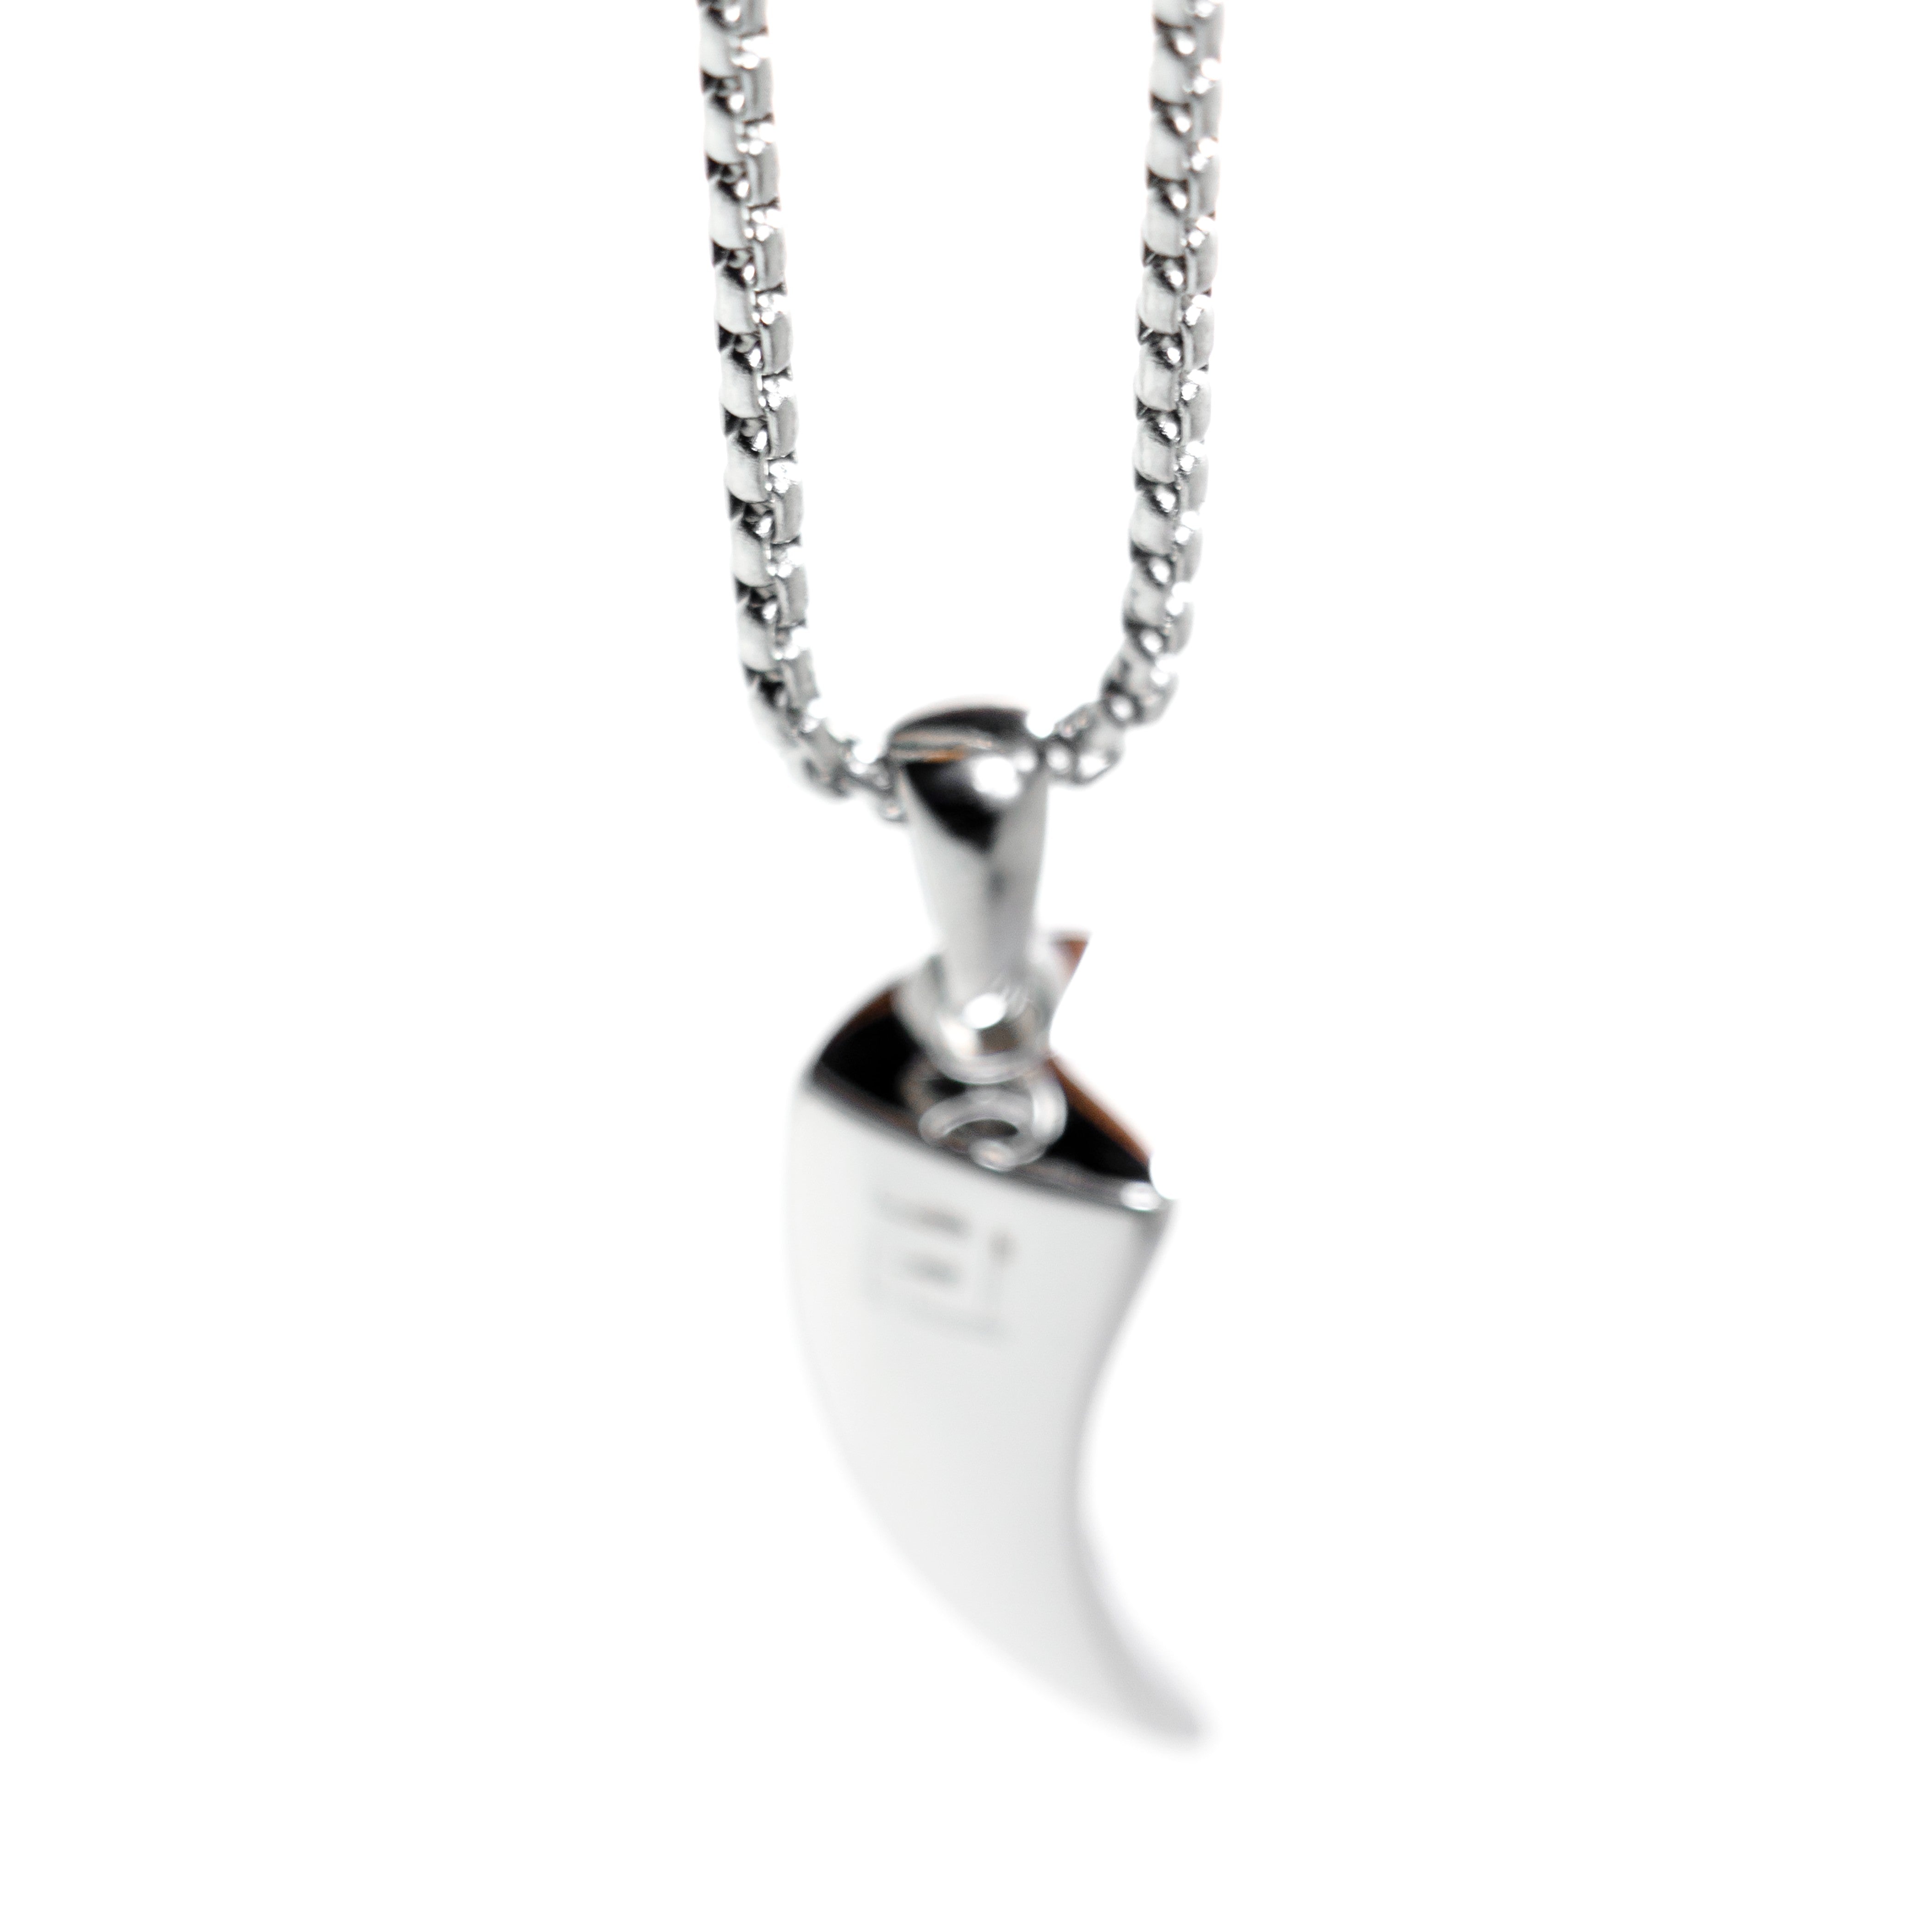 Tiger Claw Necklace in Silver